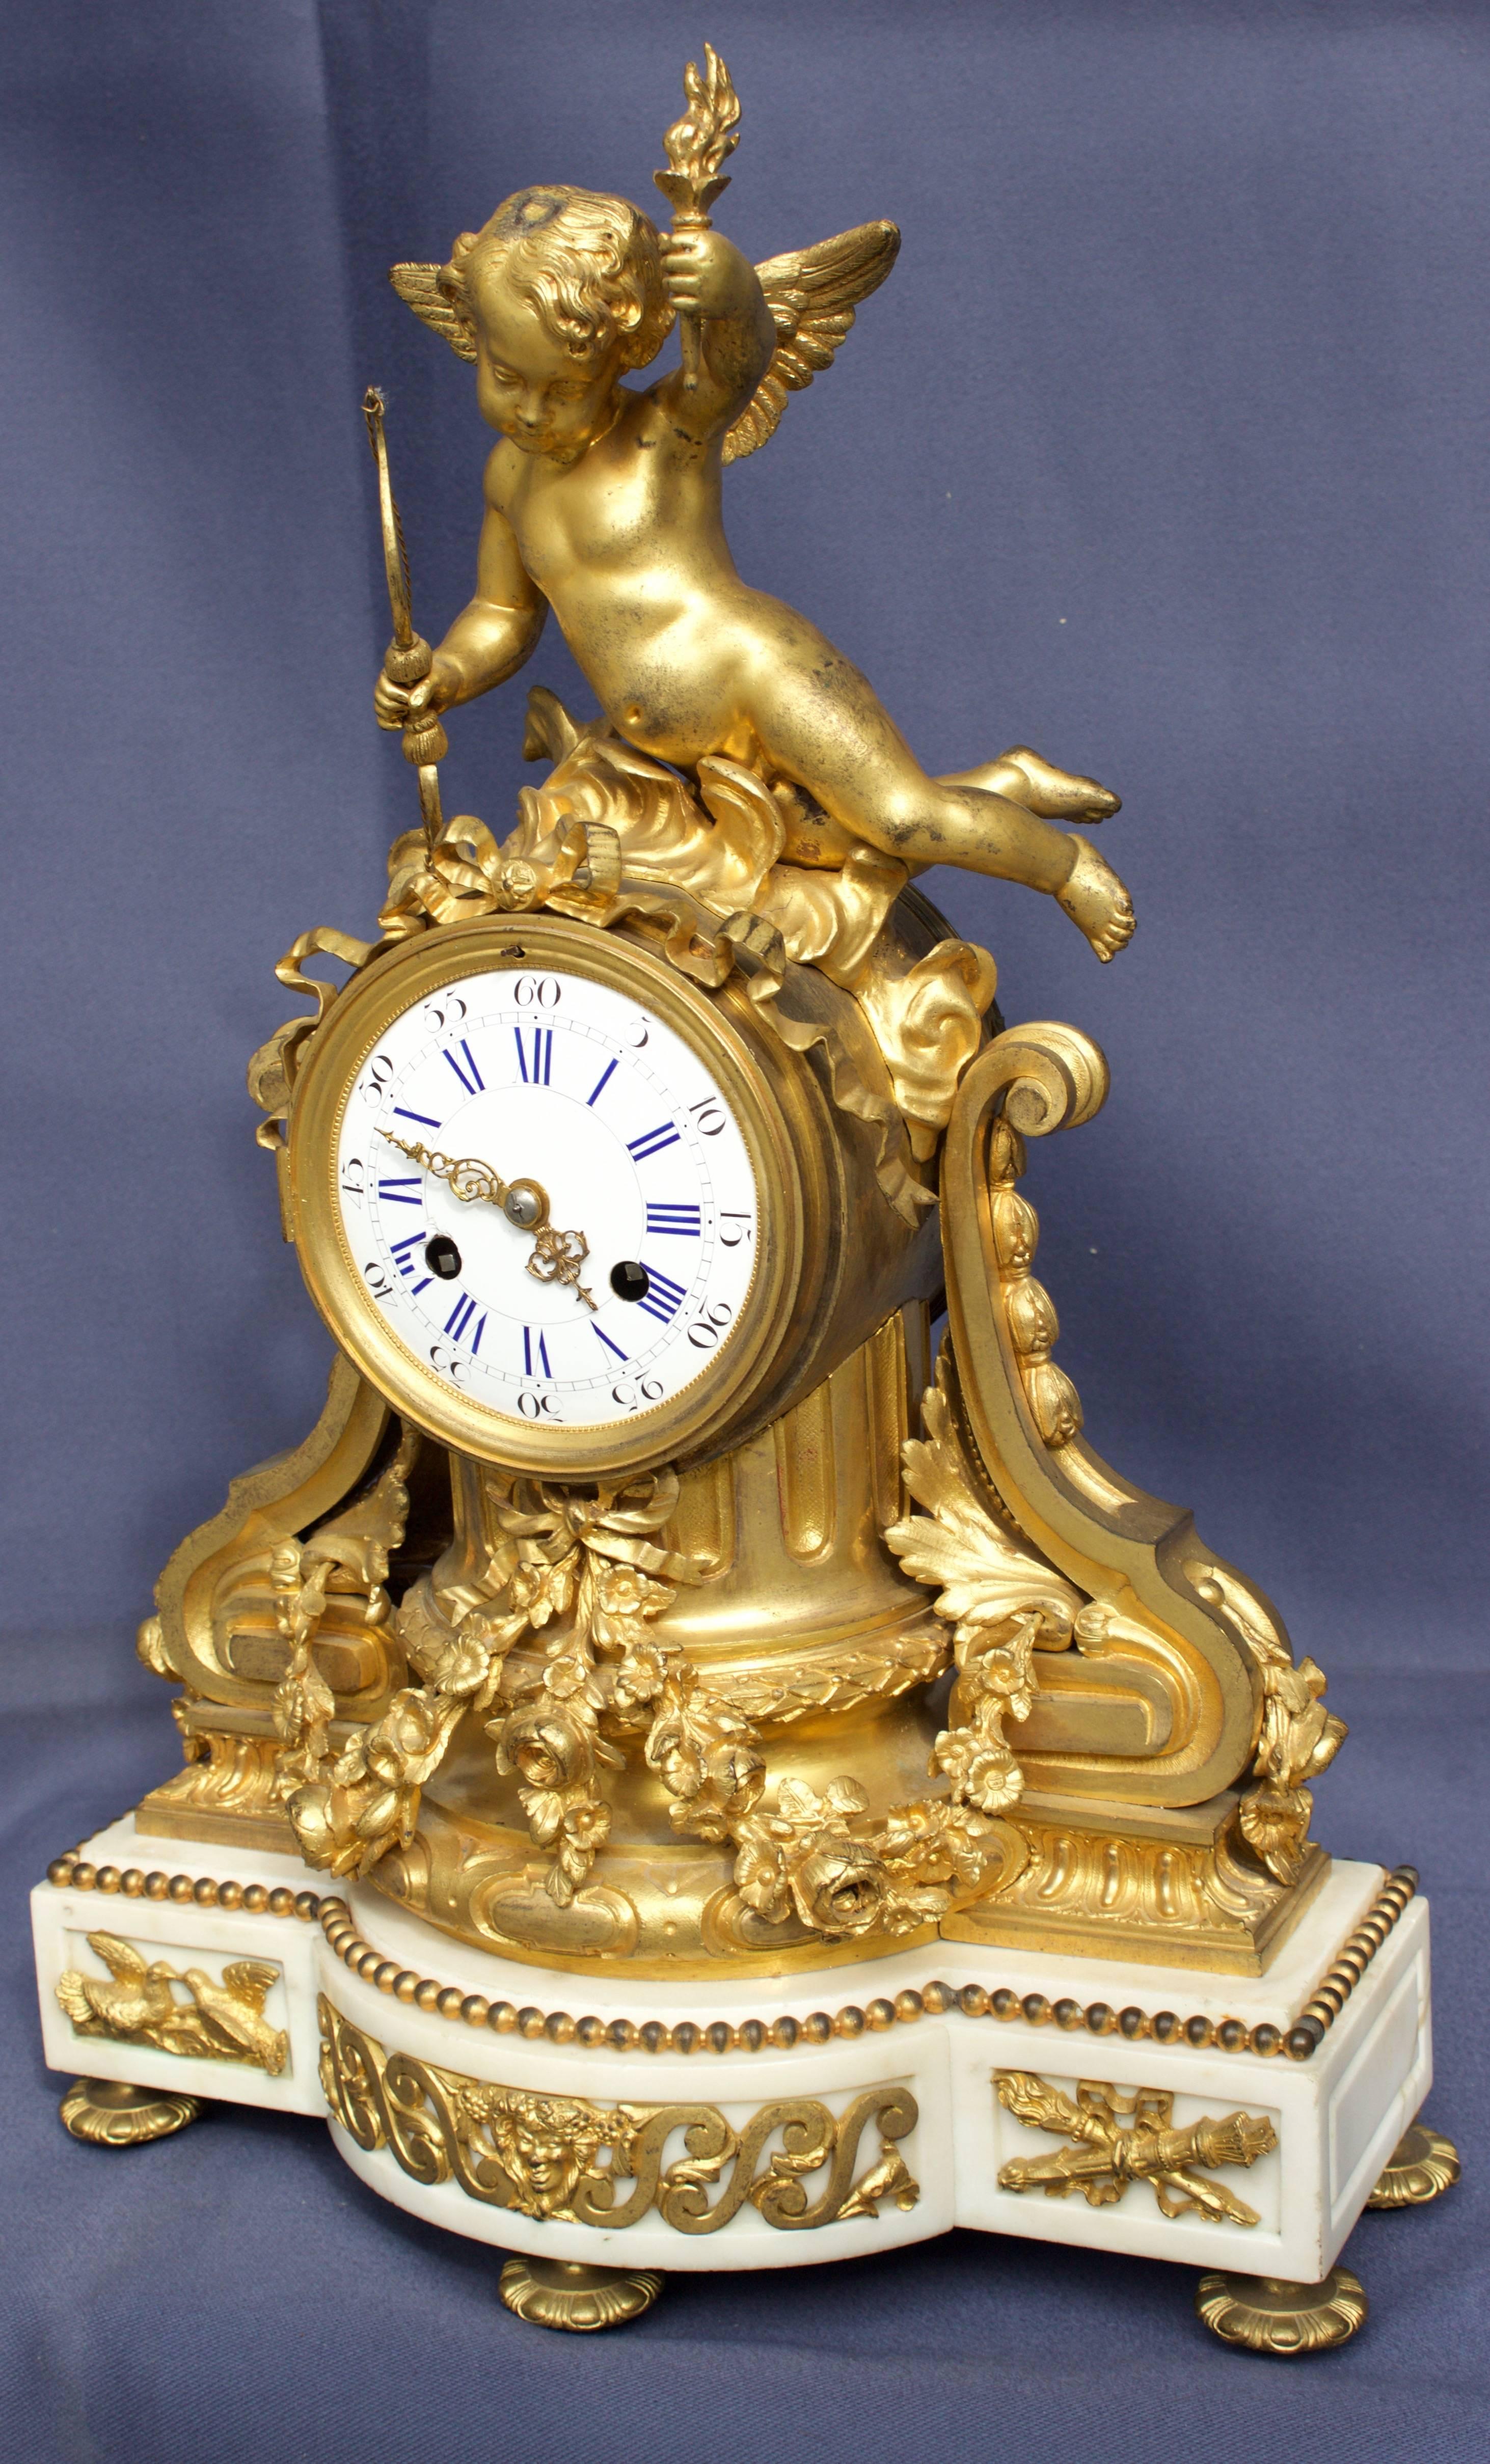 A superb mid-19th century. Clock with beautifully chased and ormolu gilded bronzes. Rest on a white Carrara marble base supported by five nice adjustable toupie feet and decorated by gilt pearls on top, two doves (symbol of love) and fasces bundles